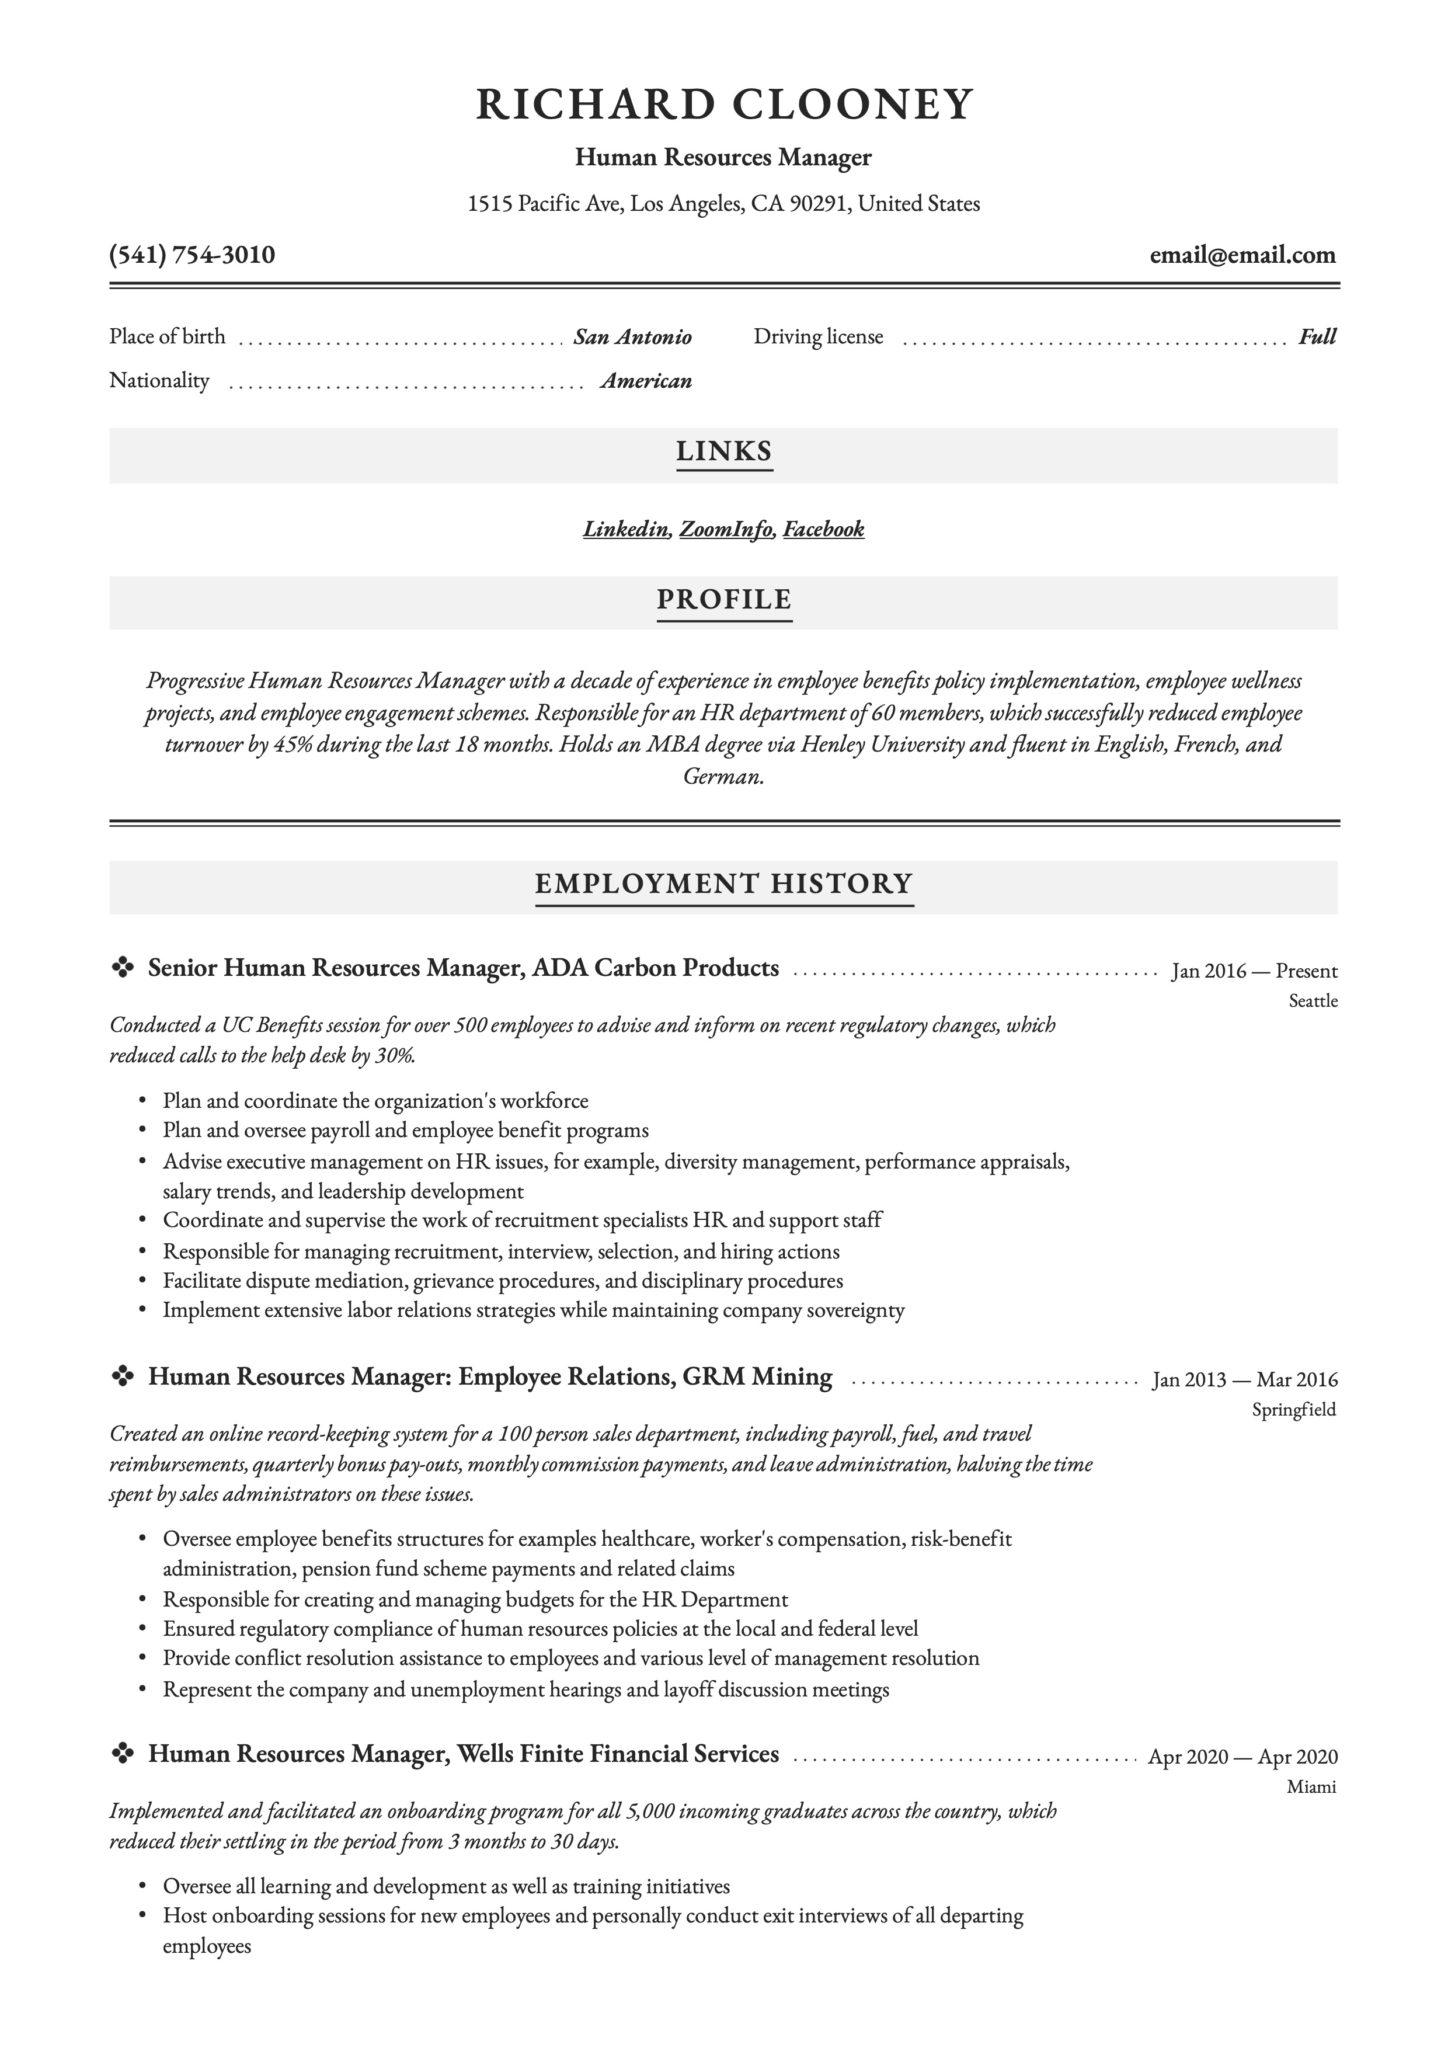 Resume Sample Human Resources Manager